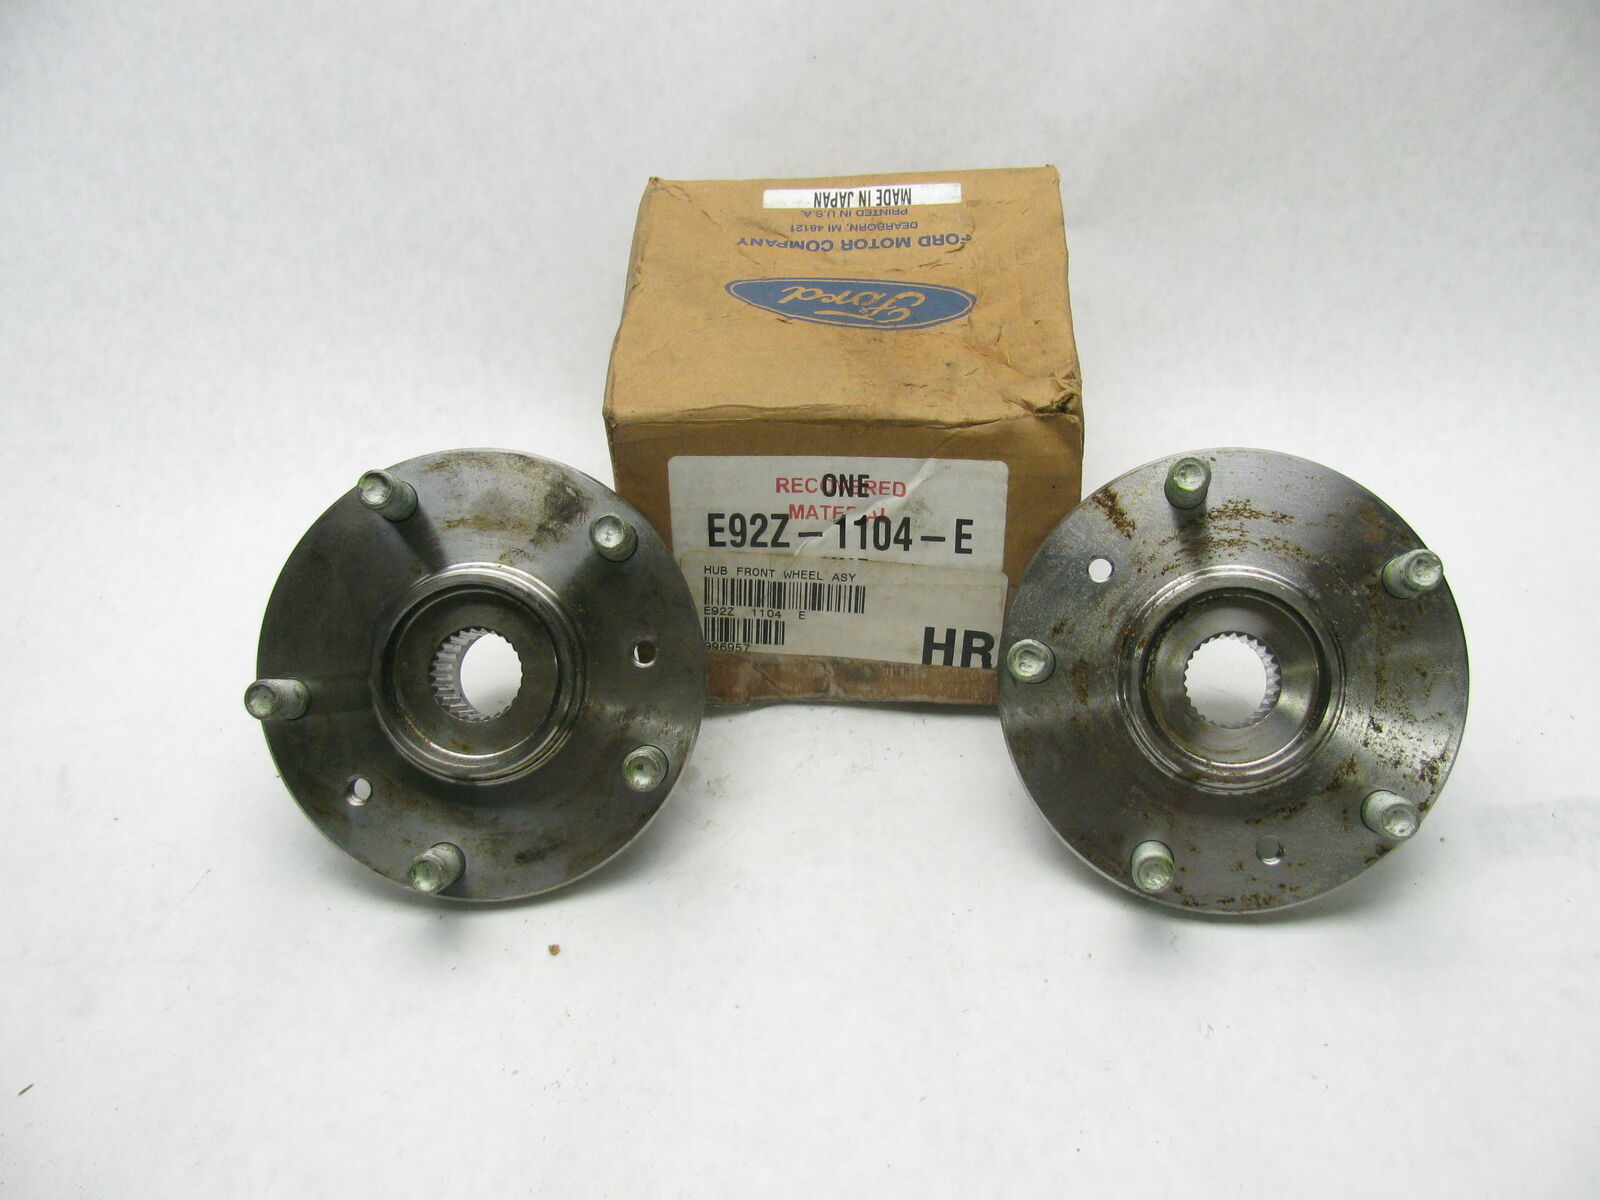 (x2) OEM Ford Front Wheel Hub E92Z-1104-E For 1989-1992 Ford Probe 2.2L